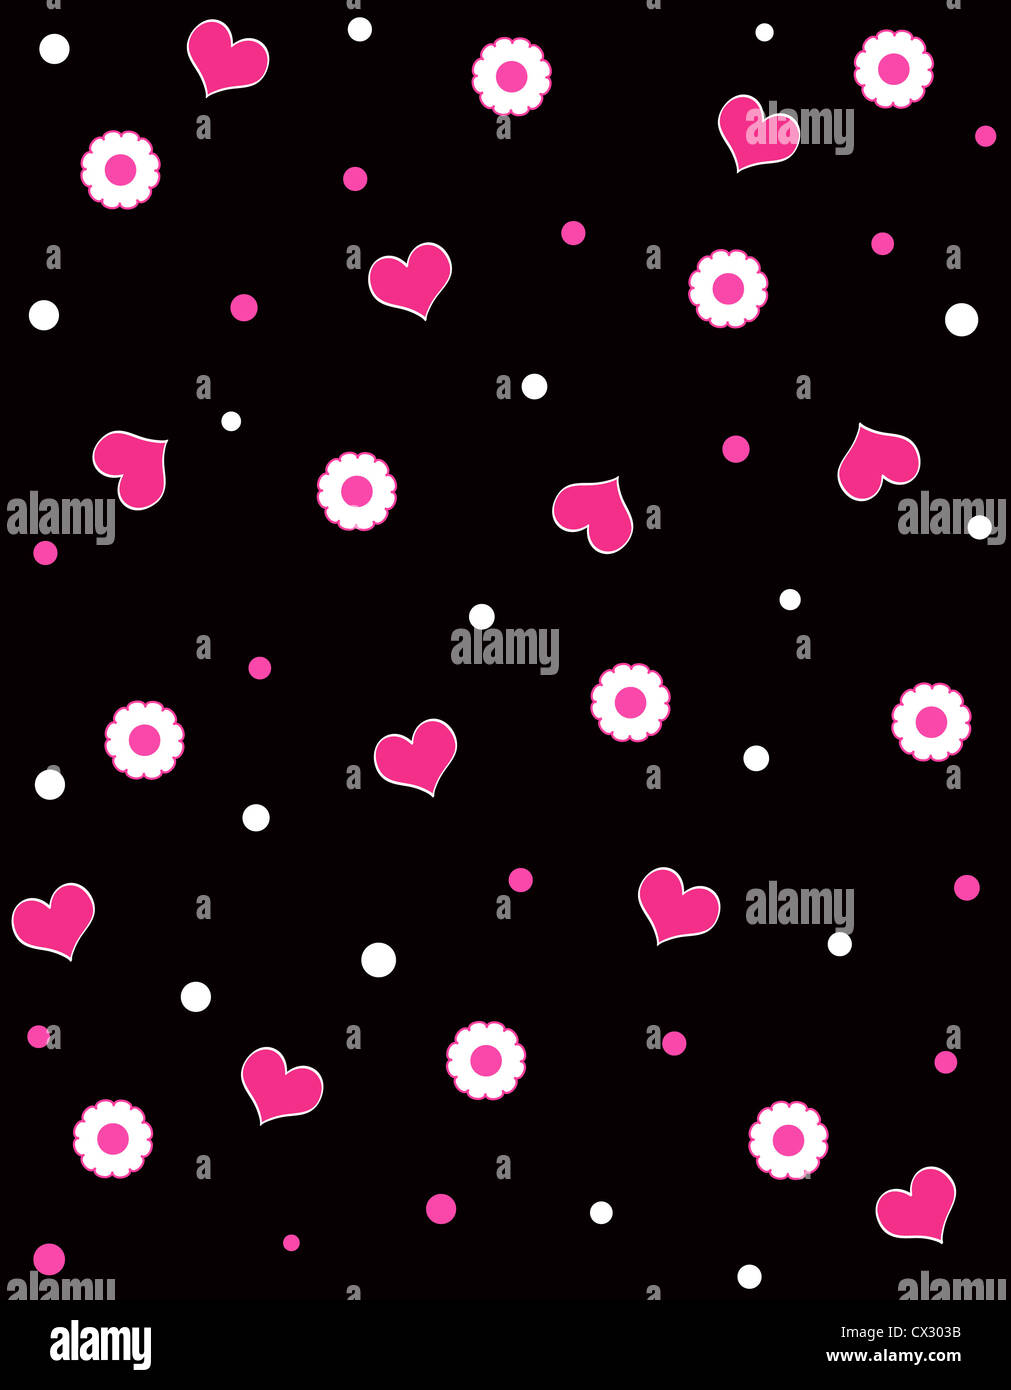 Pink hearts and white flowers pattern on black Stock Photo